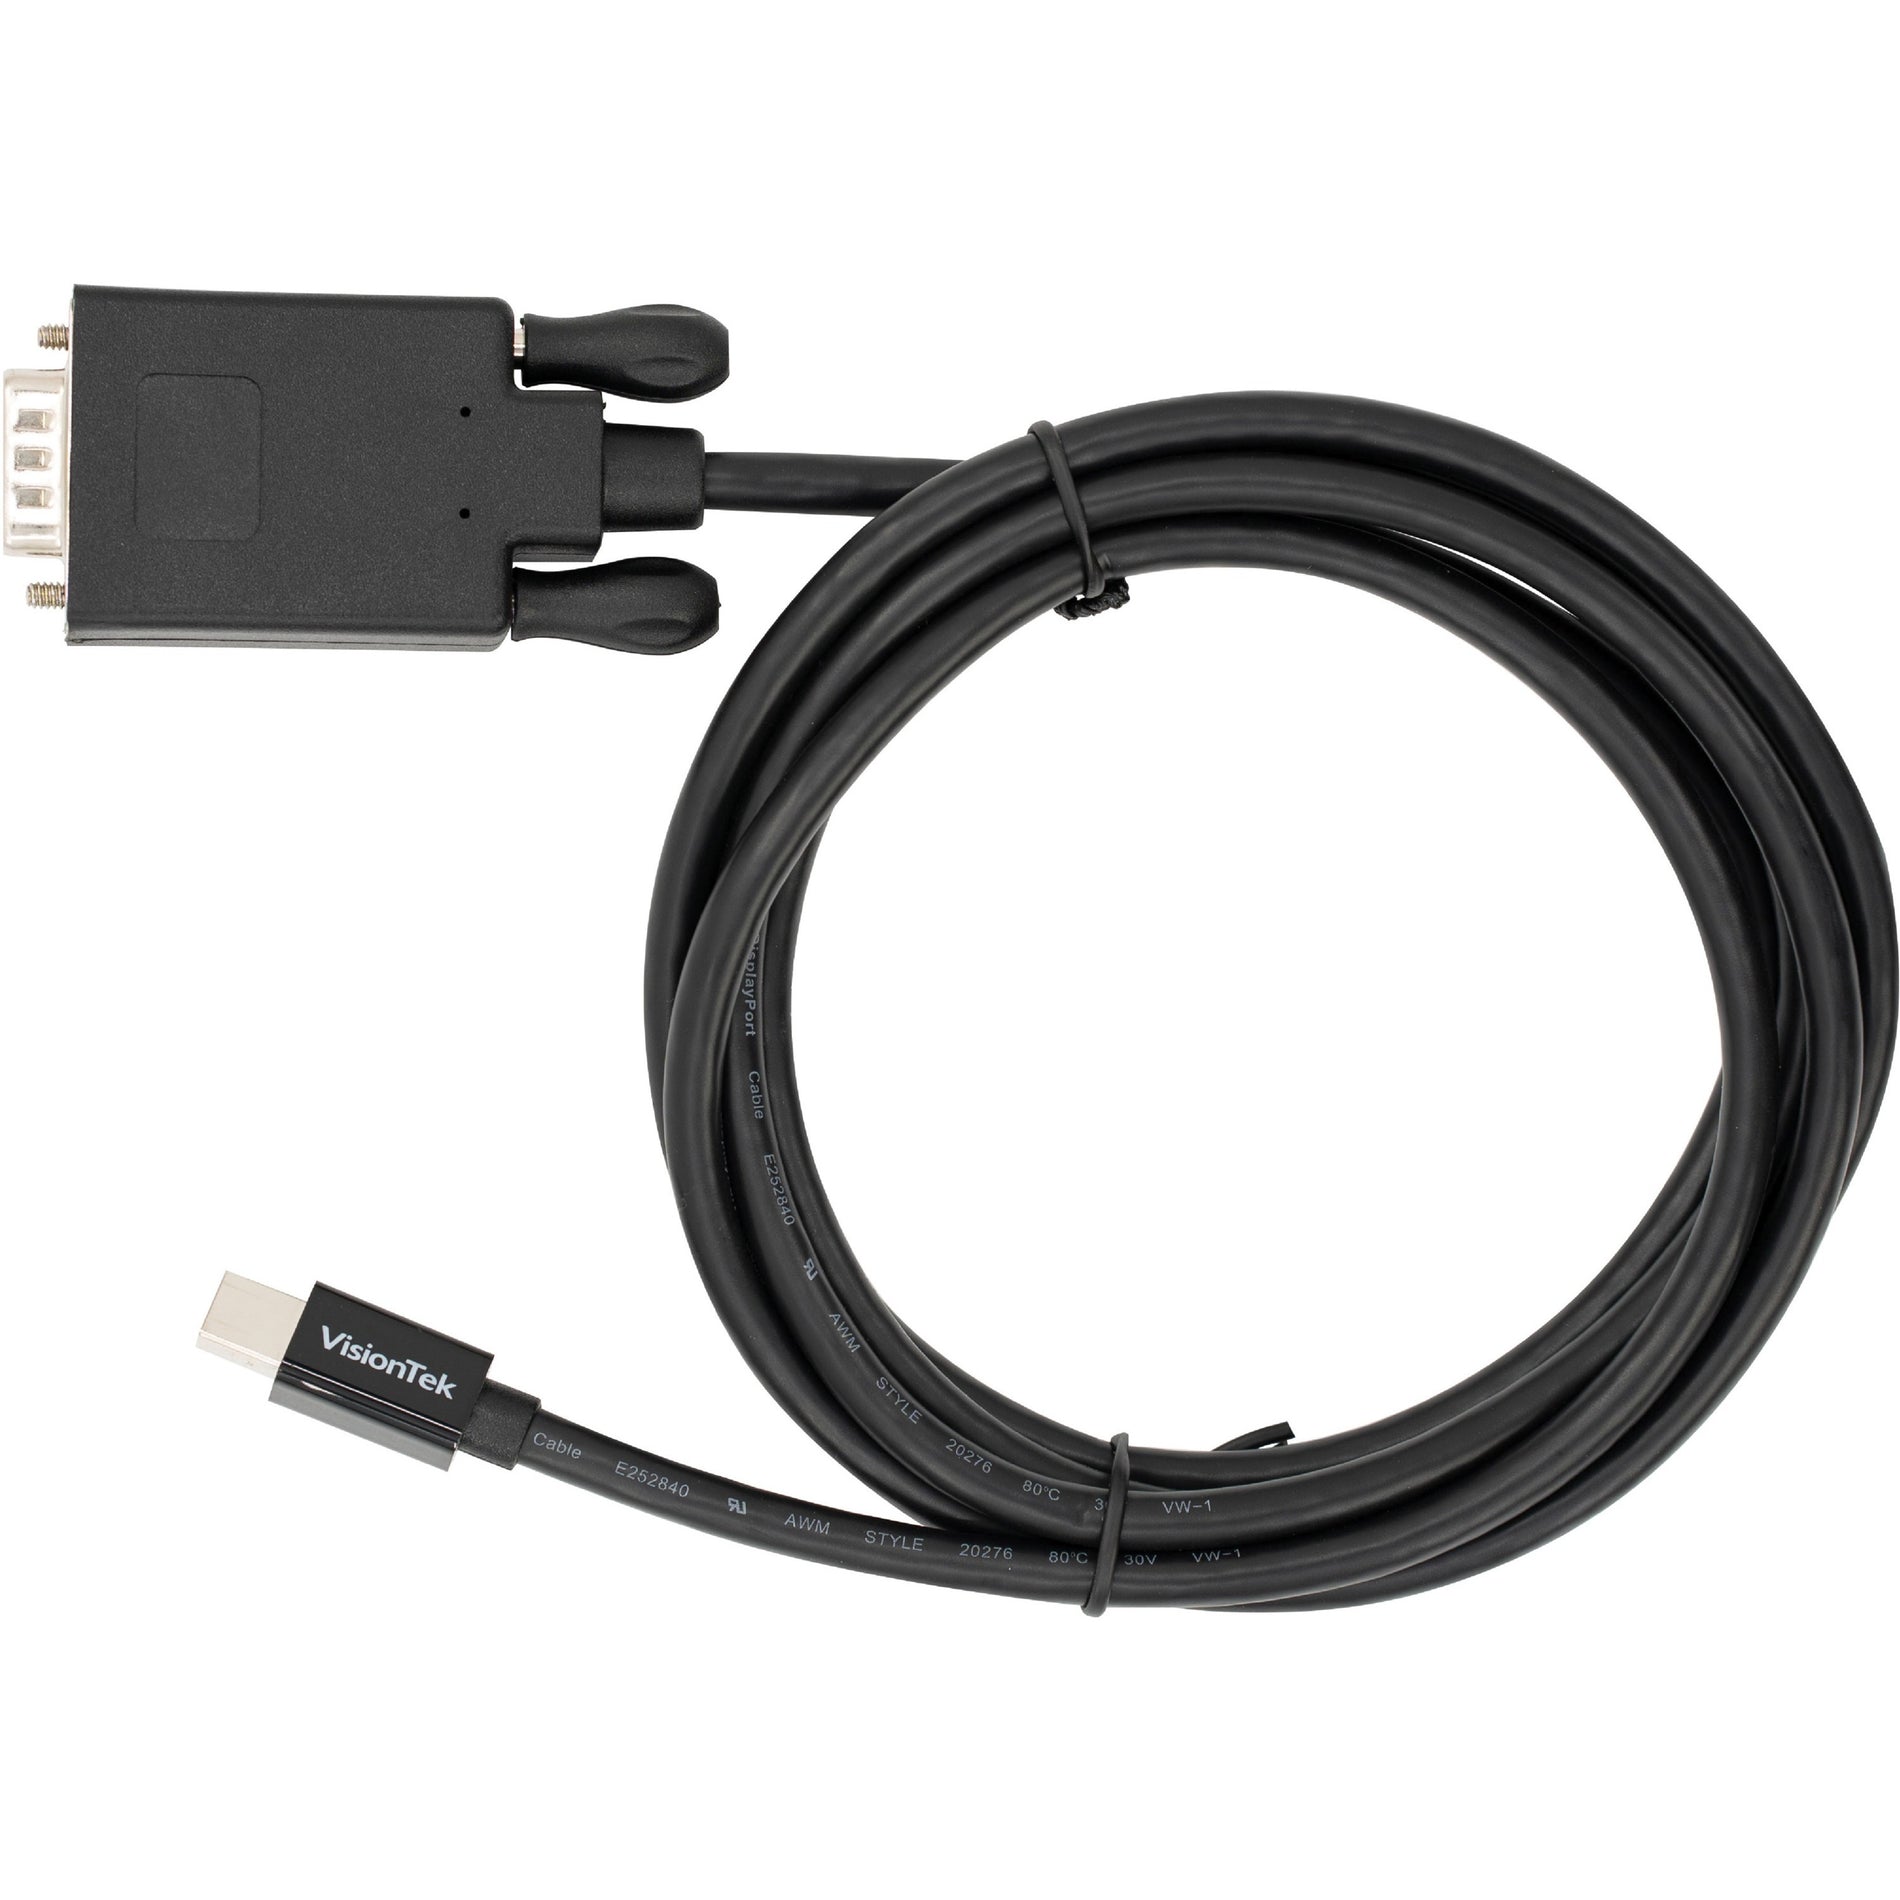 VisionTek 901217 Mini DisplayPort to VGA 2 Meter Active Cable (M/M), Plug & Play, 1920 x 1080 Supported Resolution